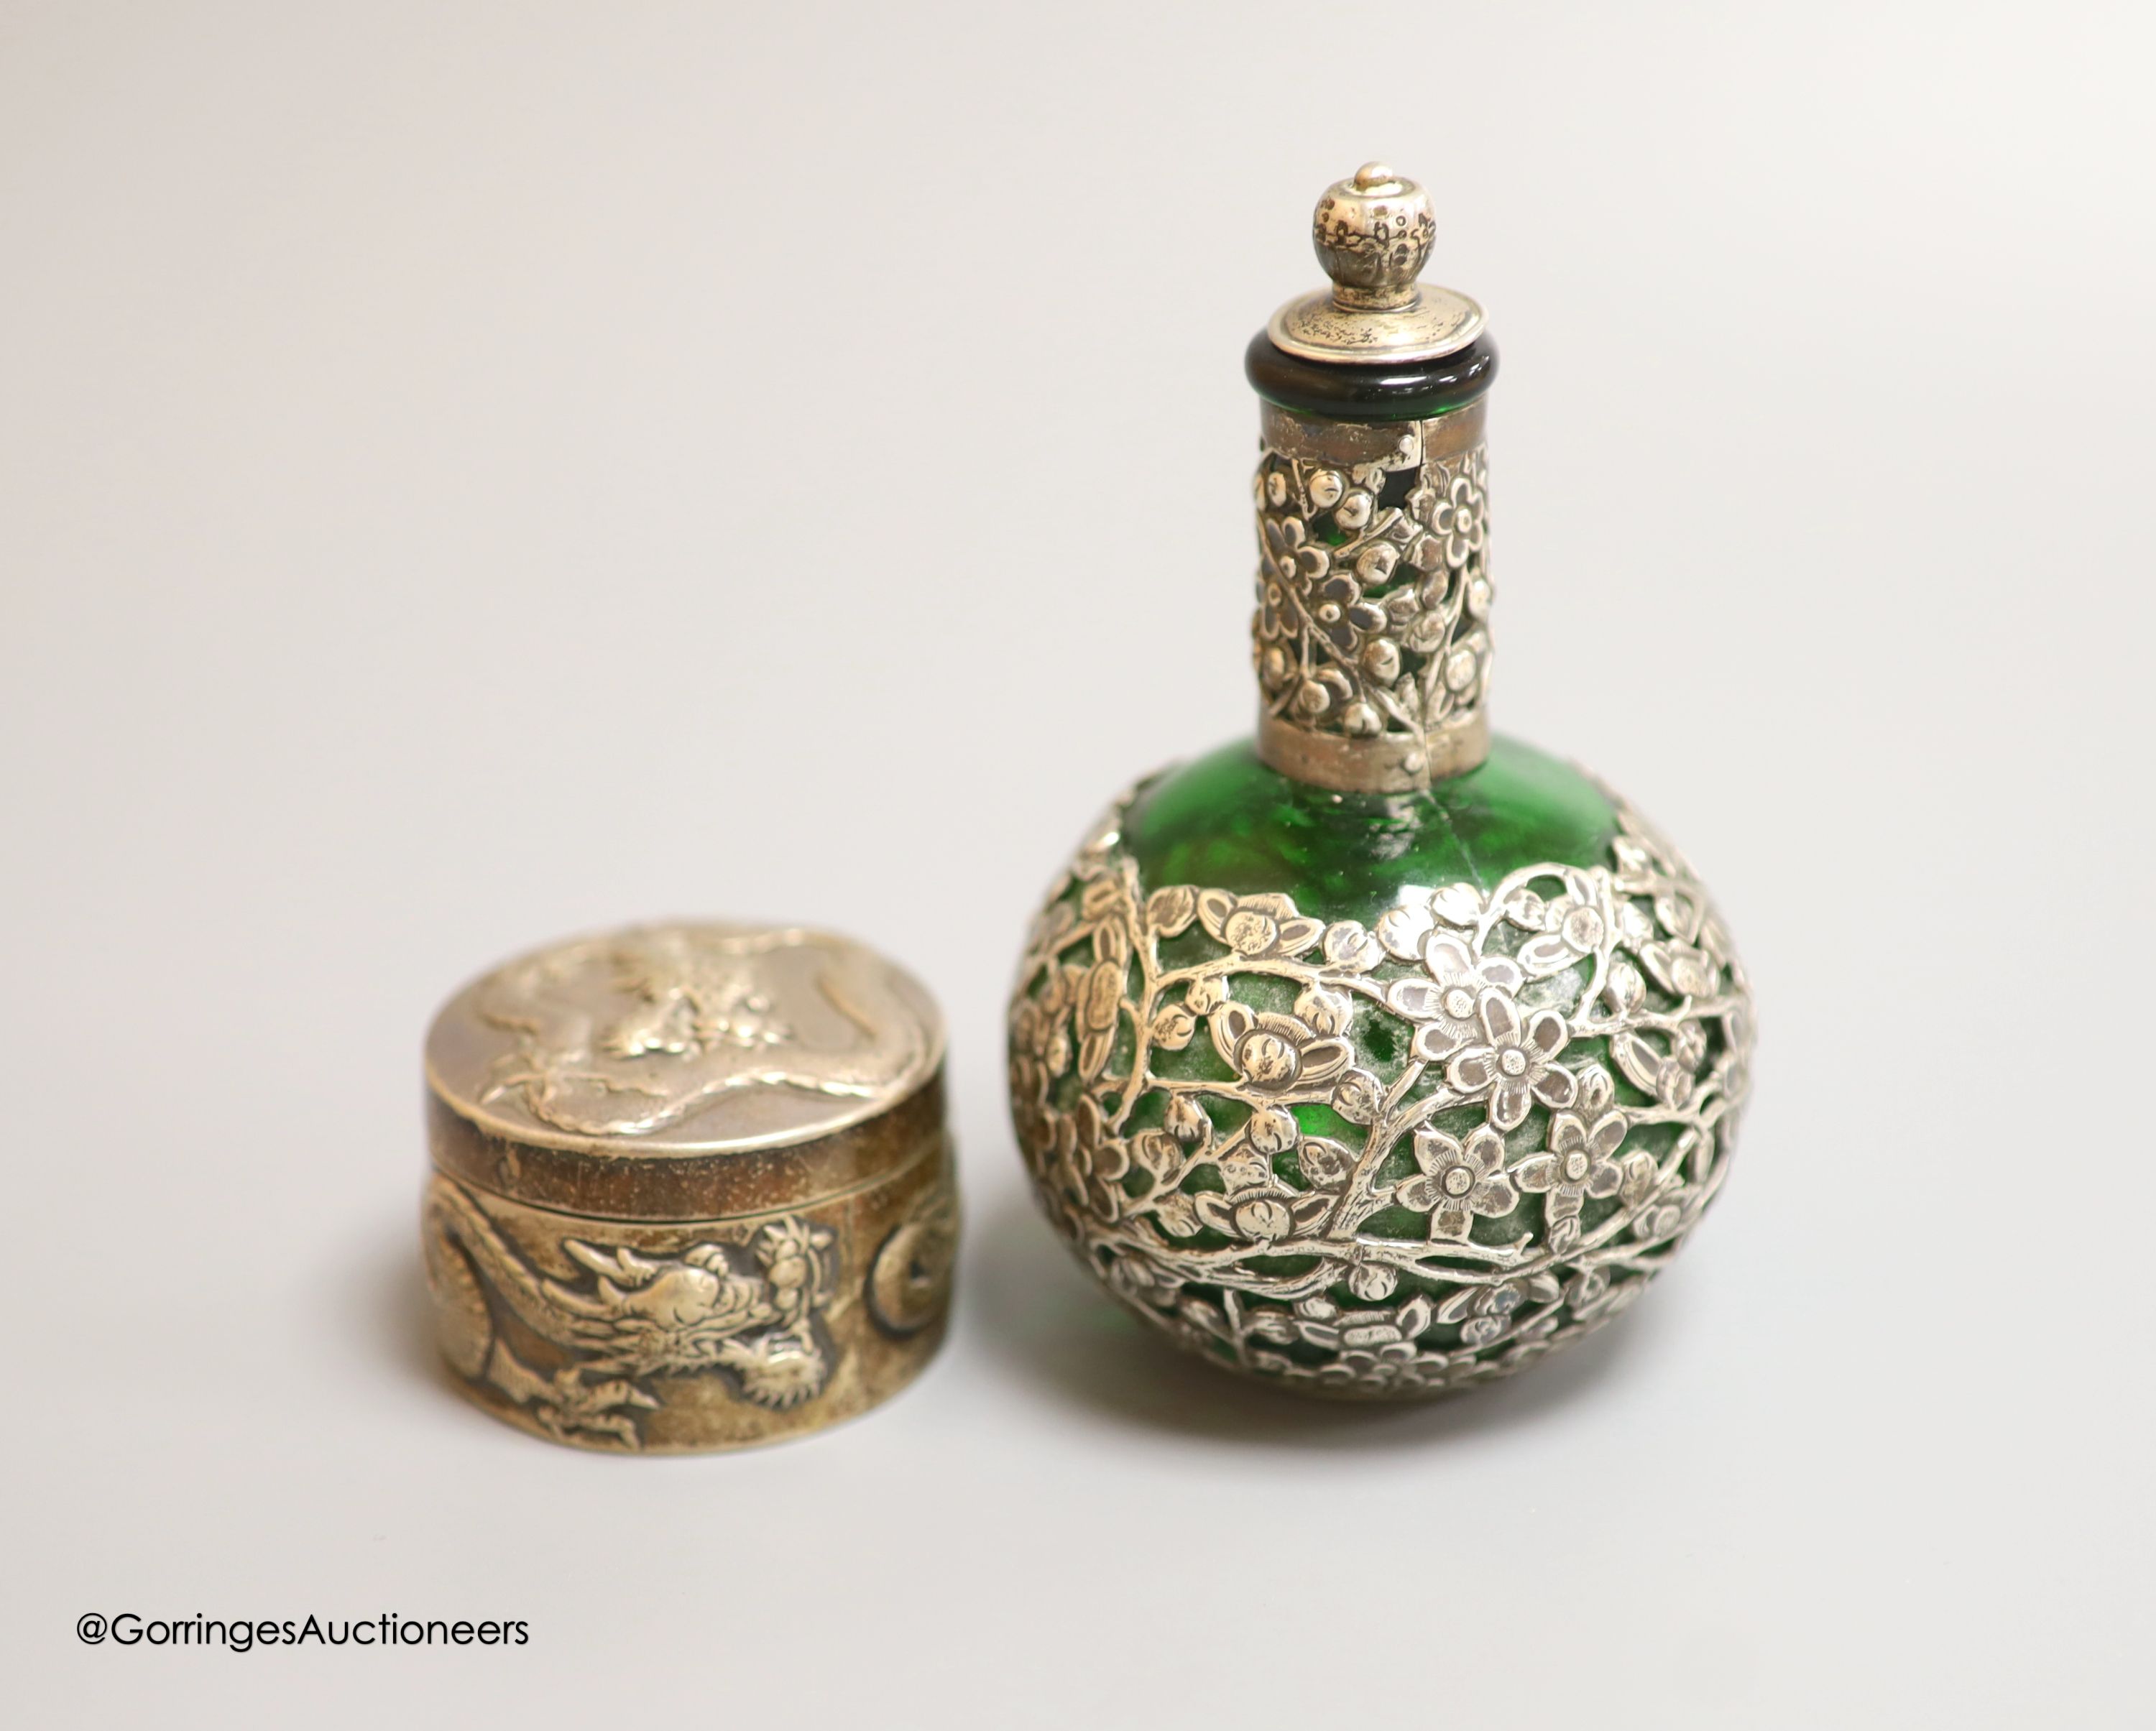 A late 19th/early 20th century Chinese Export white metal circular box, by Wang Hing, embossed with dragons, diameter 5cm, together with a similar white metal overlaid green glass scent flask by Wang Hing, height 11.6cm.